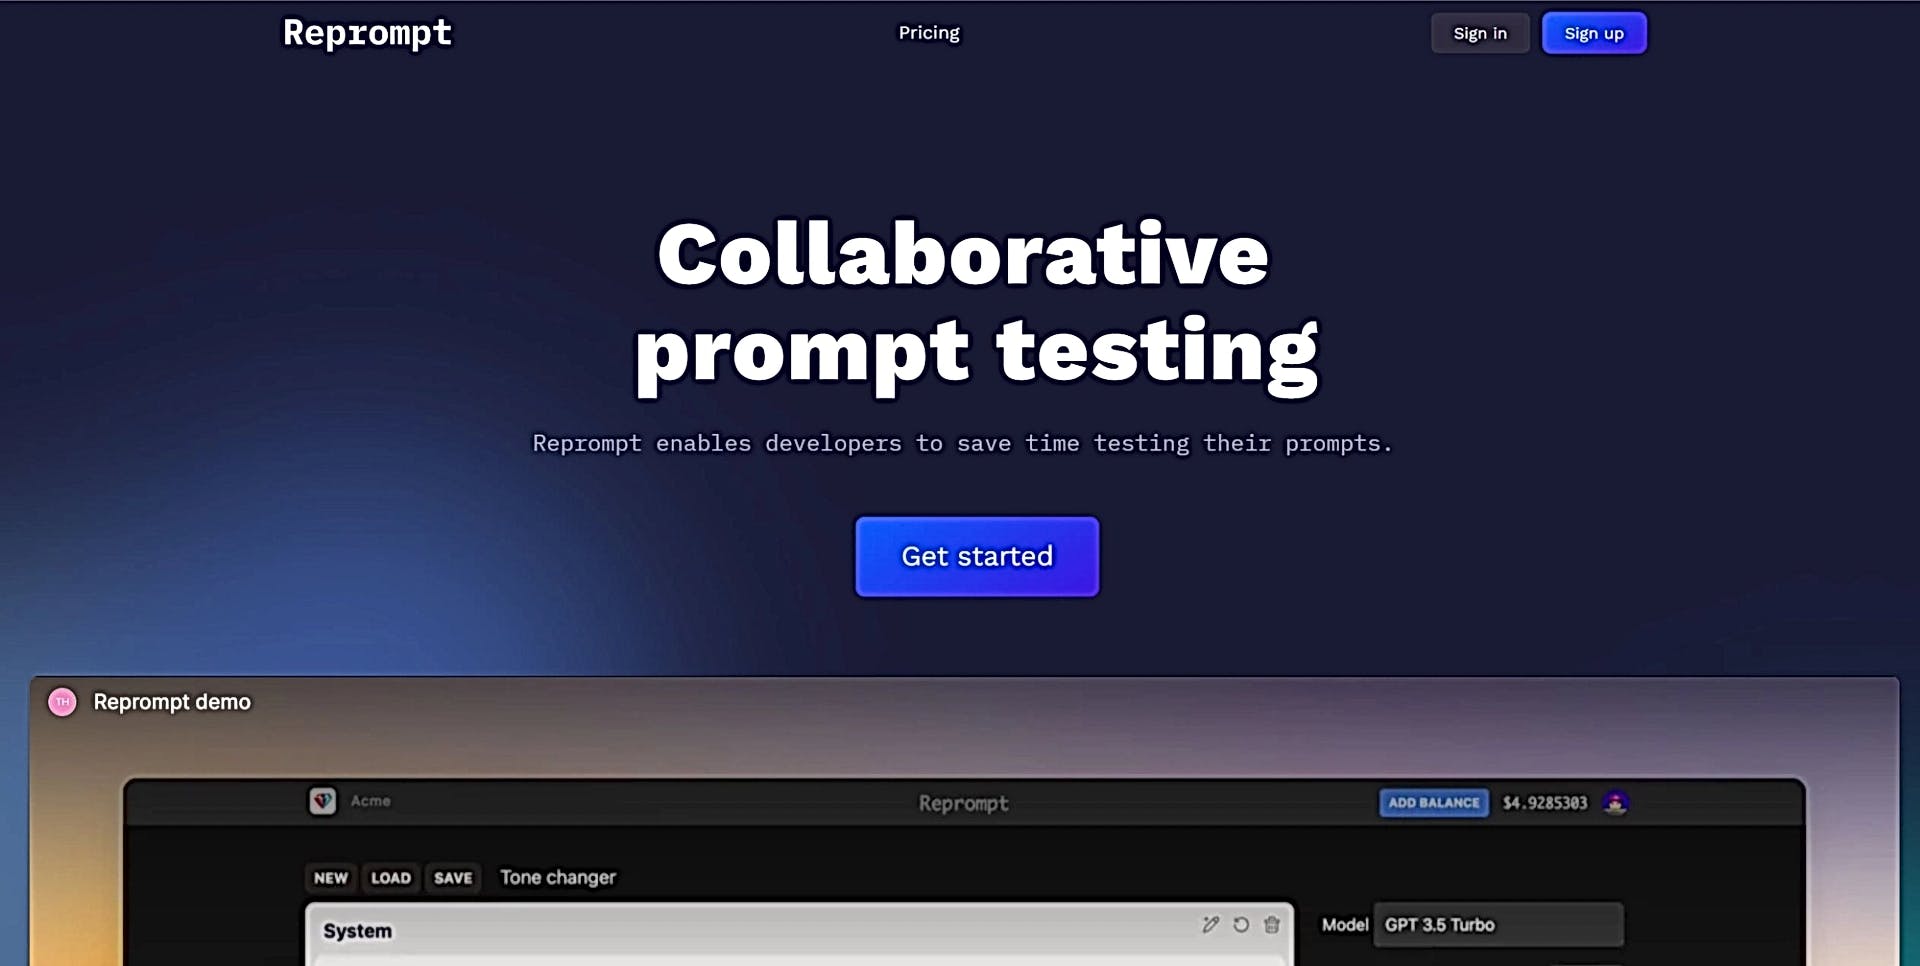 Reprompt featured